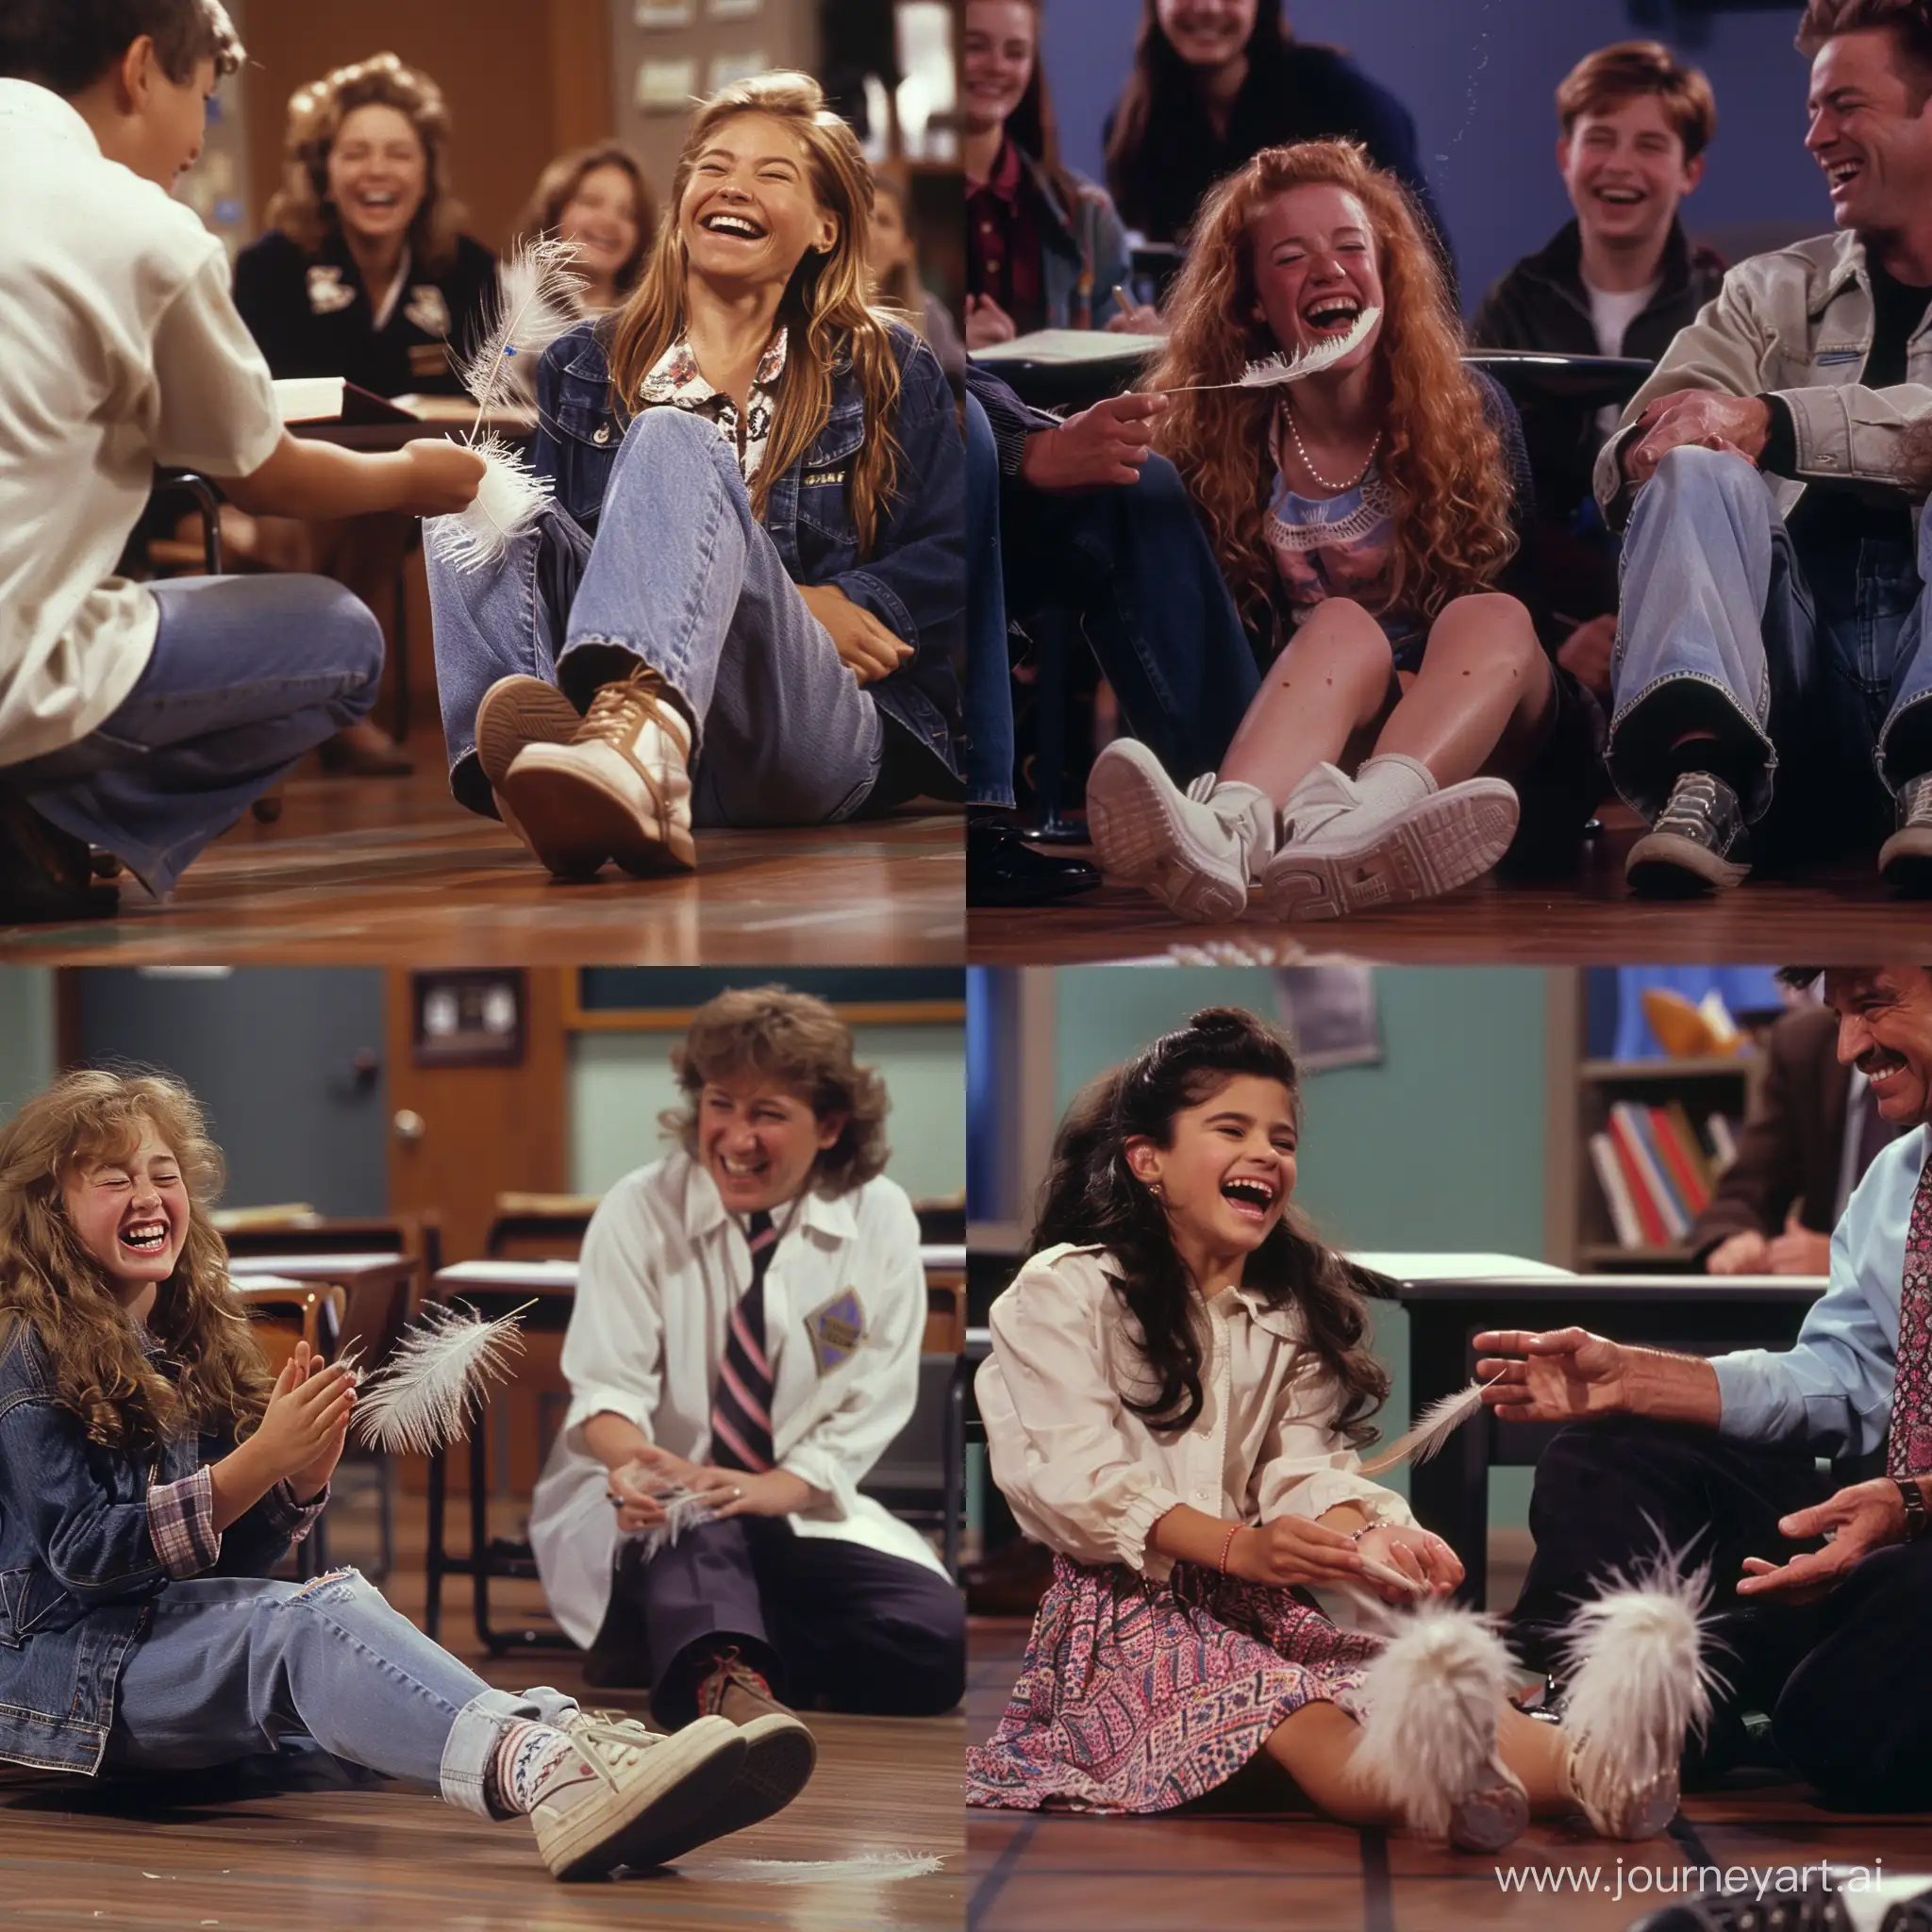 scene from a 90s sitcom, a girl is laughing in the history classroom while a professor is moving a feather over her soles,It tickles